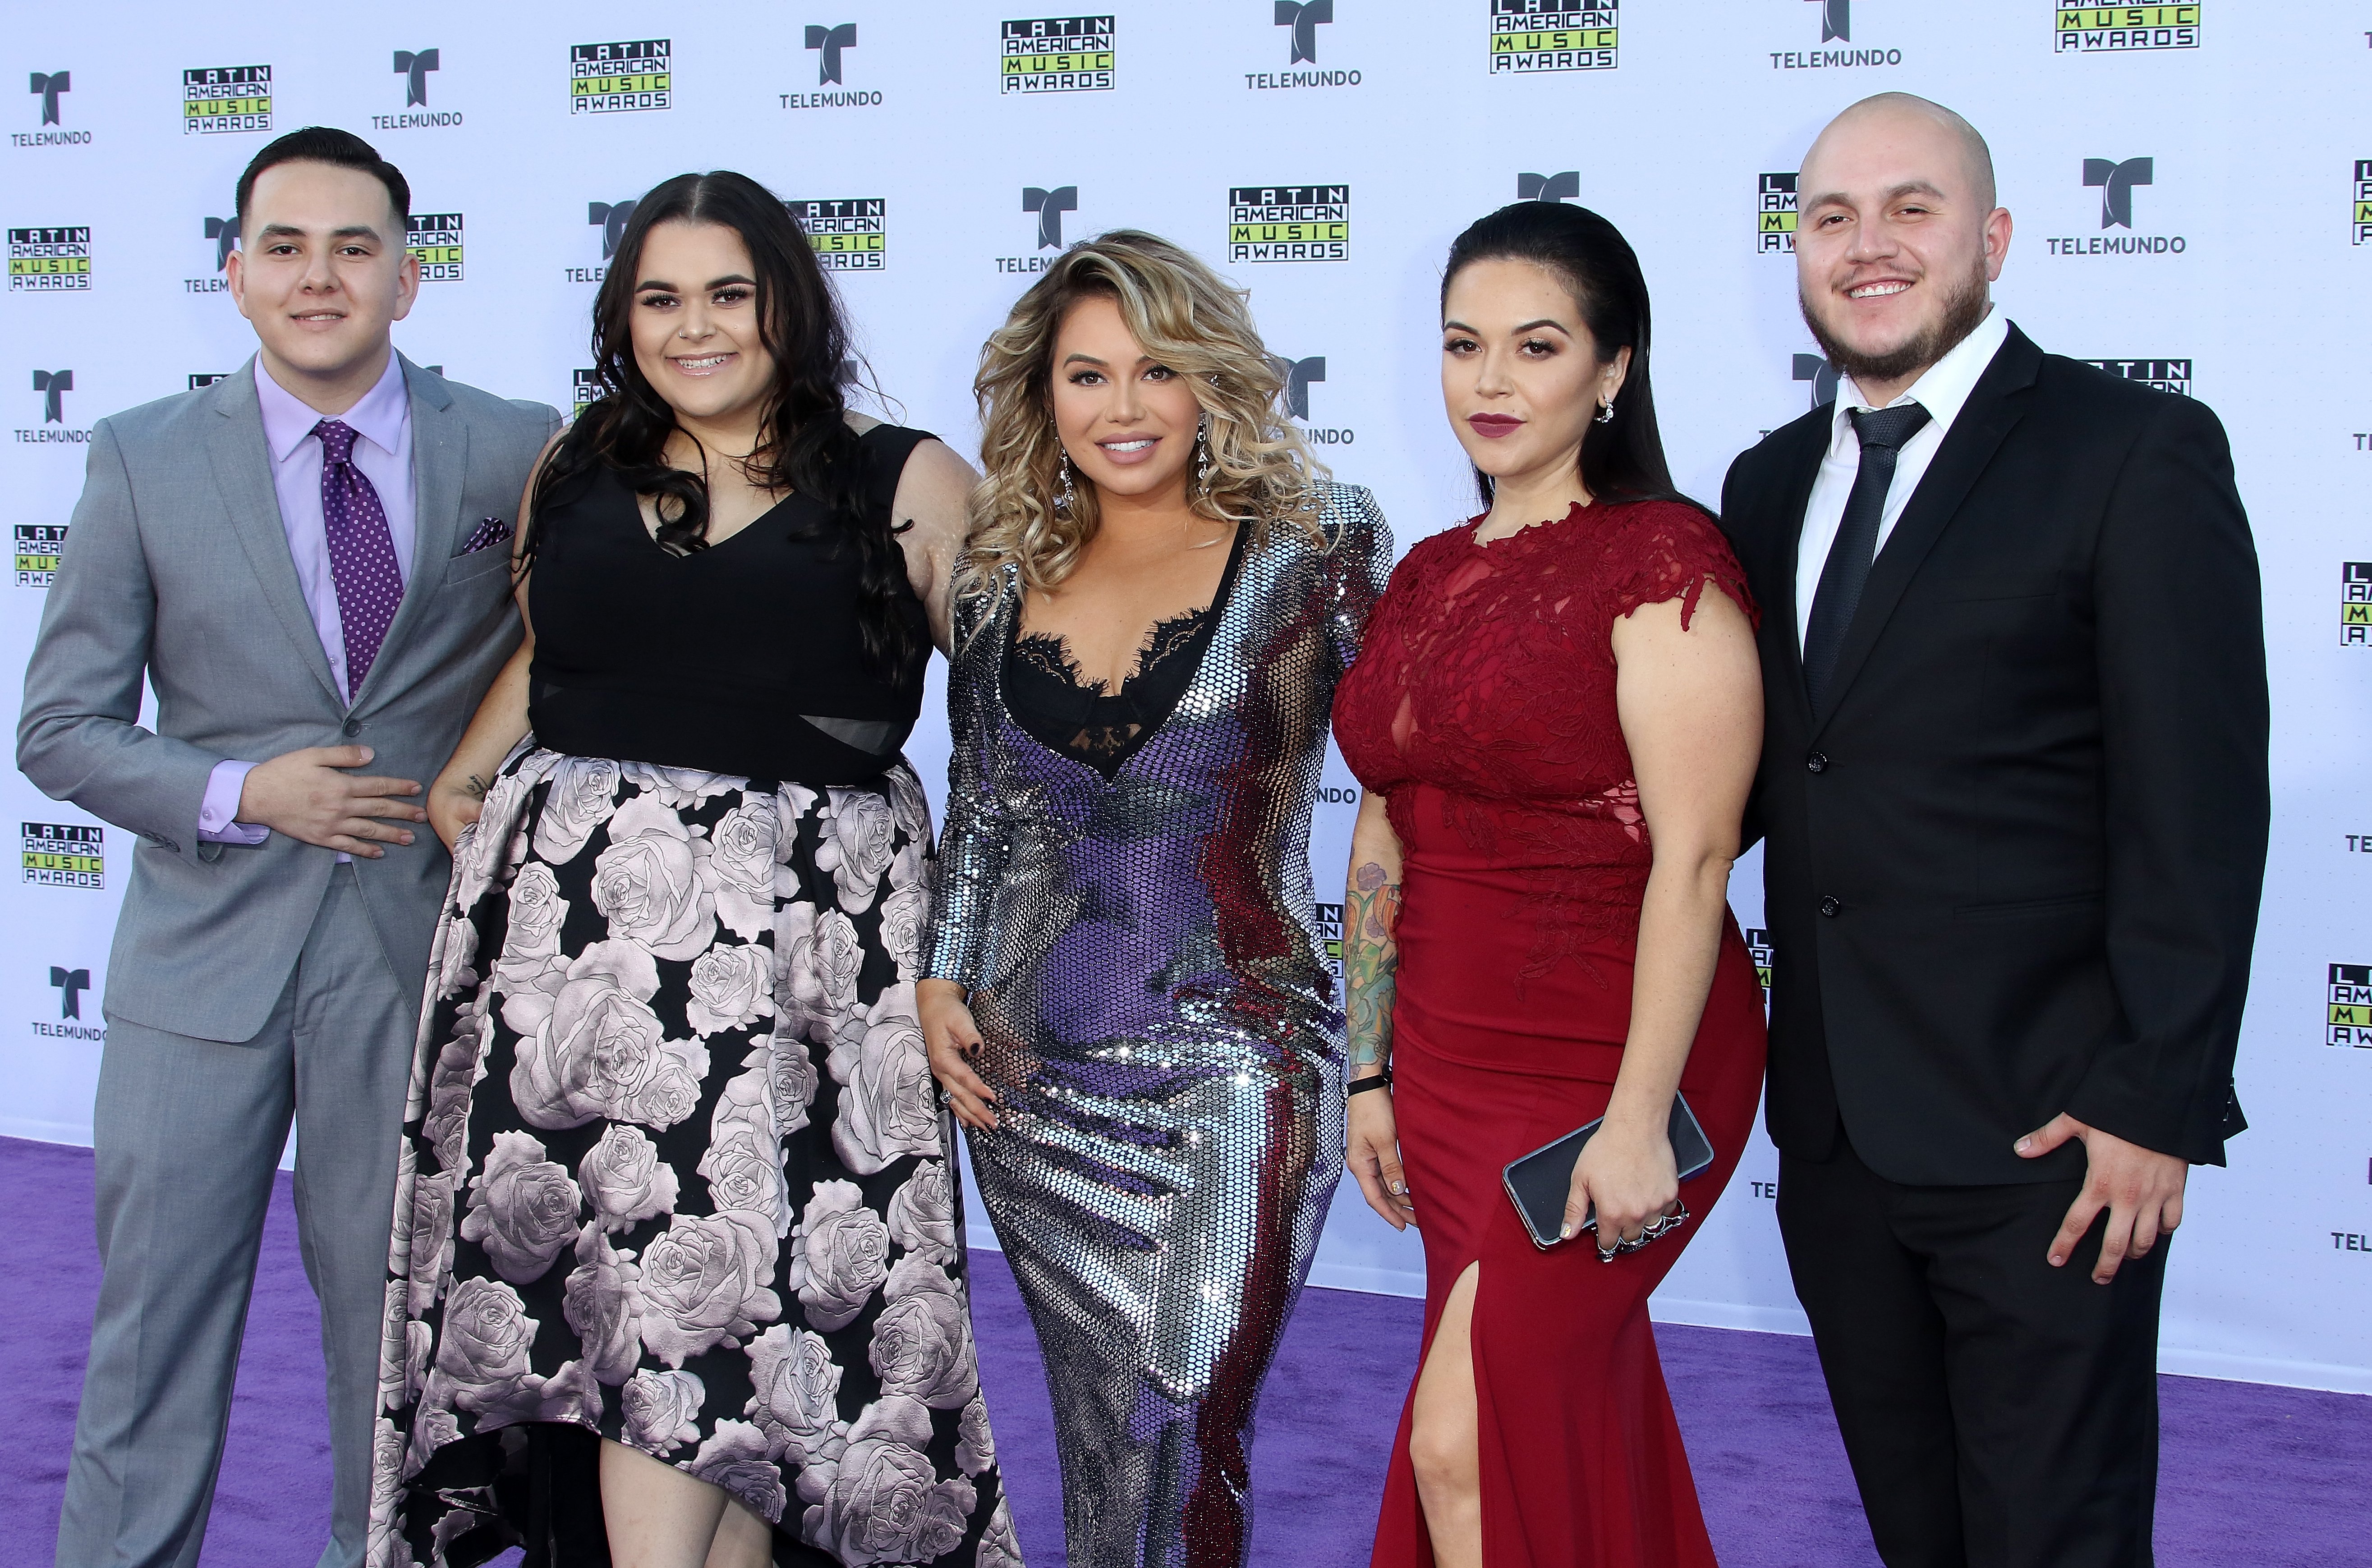 (L-R) Johnny Lopez, Jenicka Lopez, Chiquis Rivera, Jacqie Campos, Michael Marin attend The 2017 Latin American Music Awards at Dolby Theatre on October 25, 2017 in Hollywood, California. | Source: Getty Images